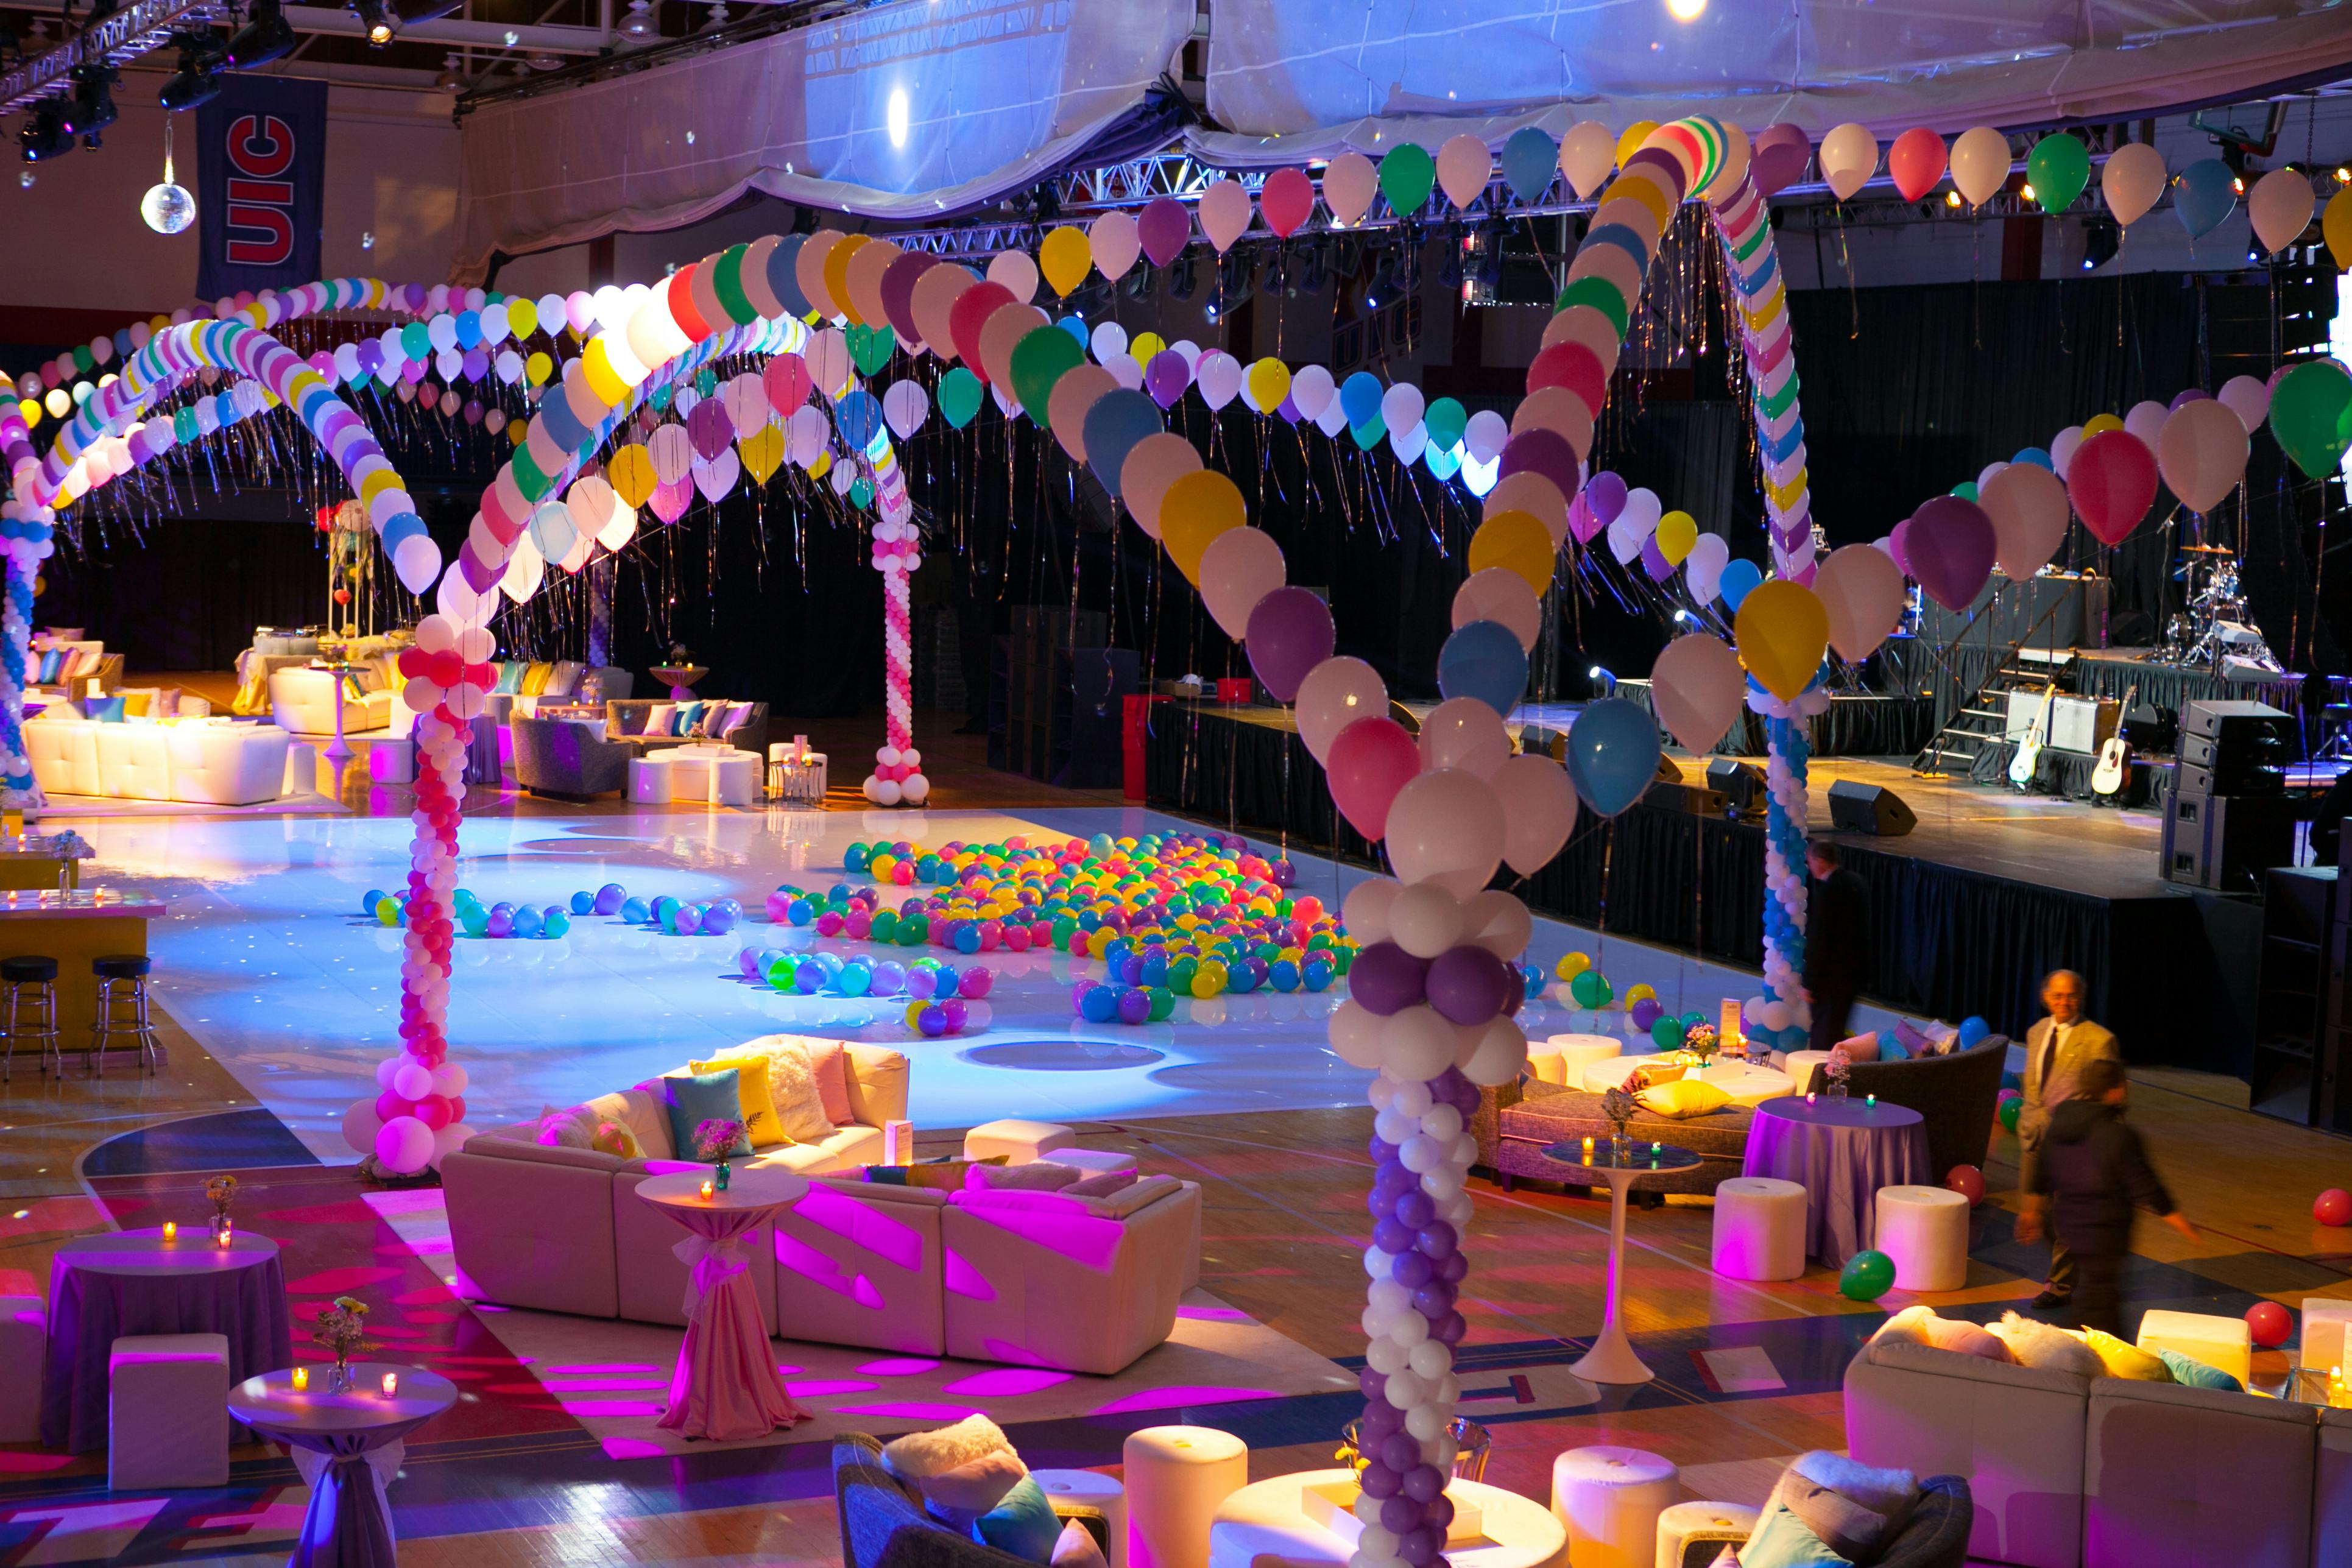 "A Night To Remember" 80s Inspired Prom Themed Corporate Anniversary in Chicago